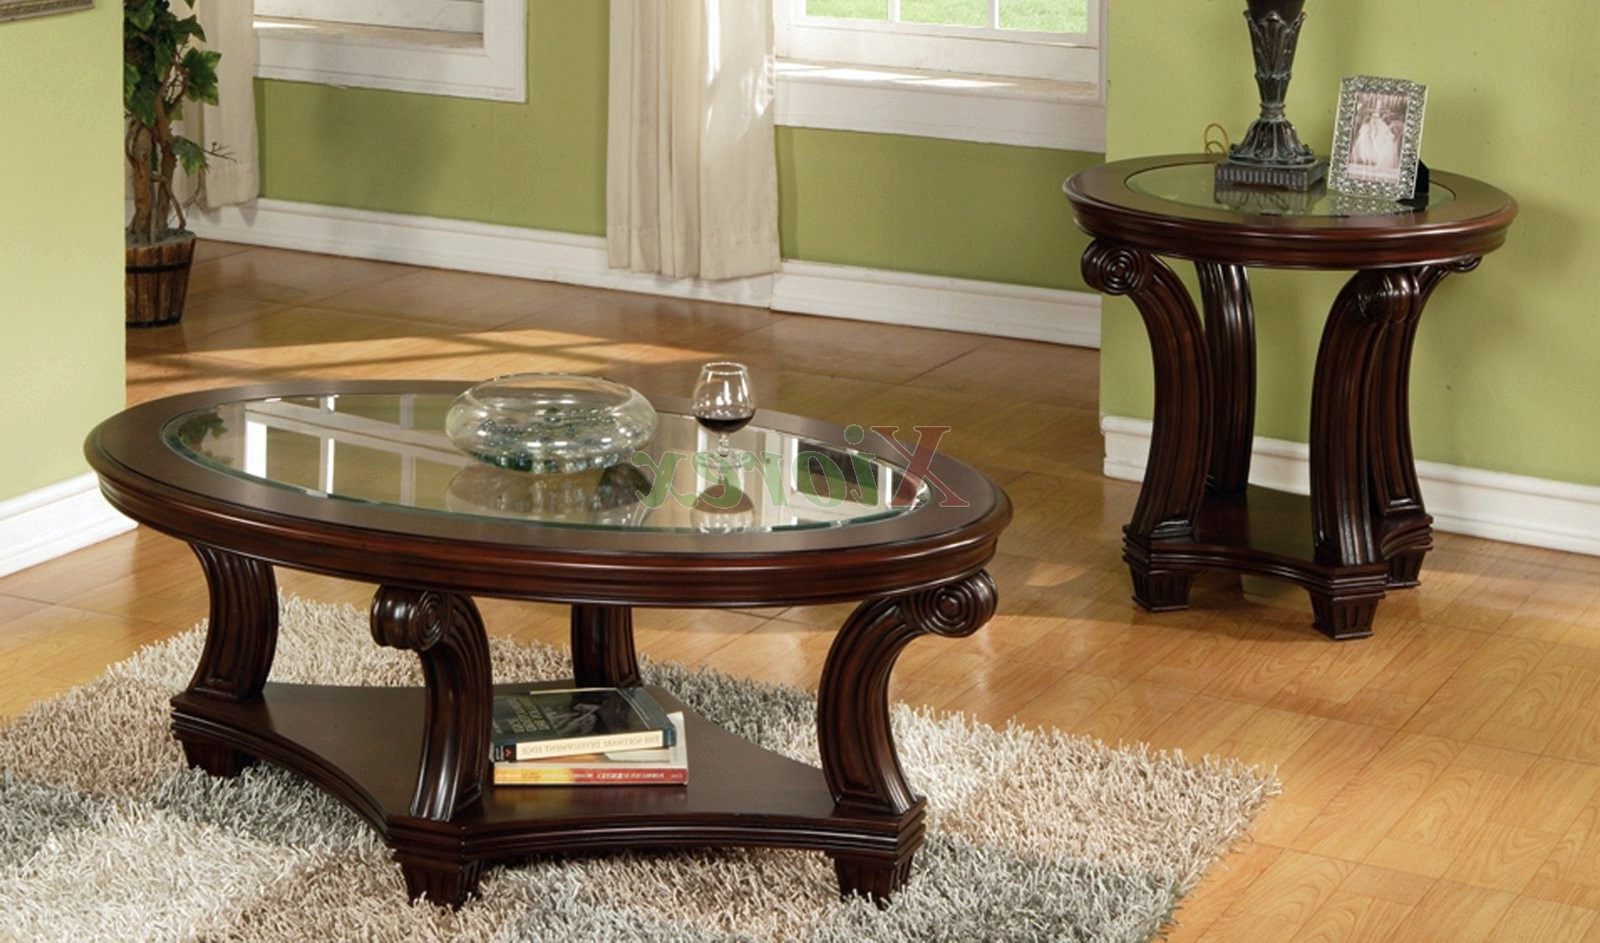 Living Room Coffee Table Sets
 Oval Coffee Table Sets Decorating Ideas